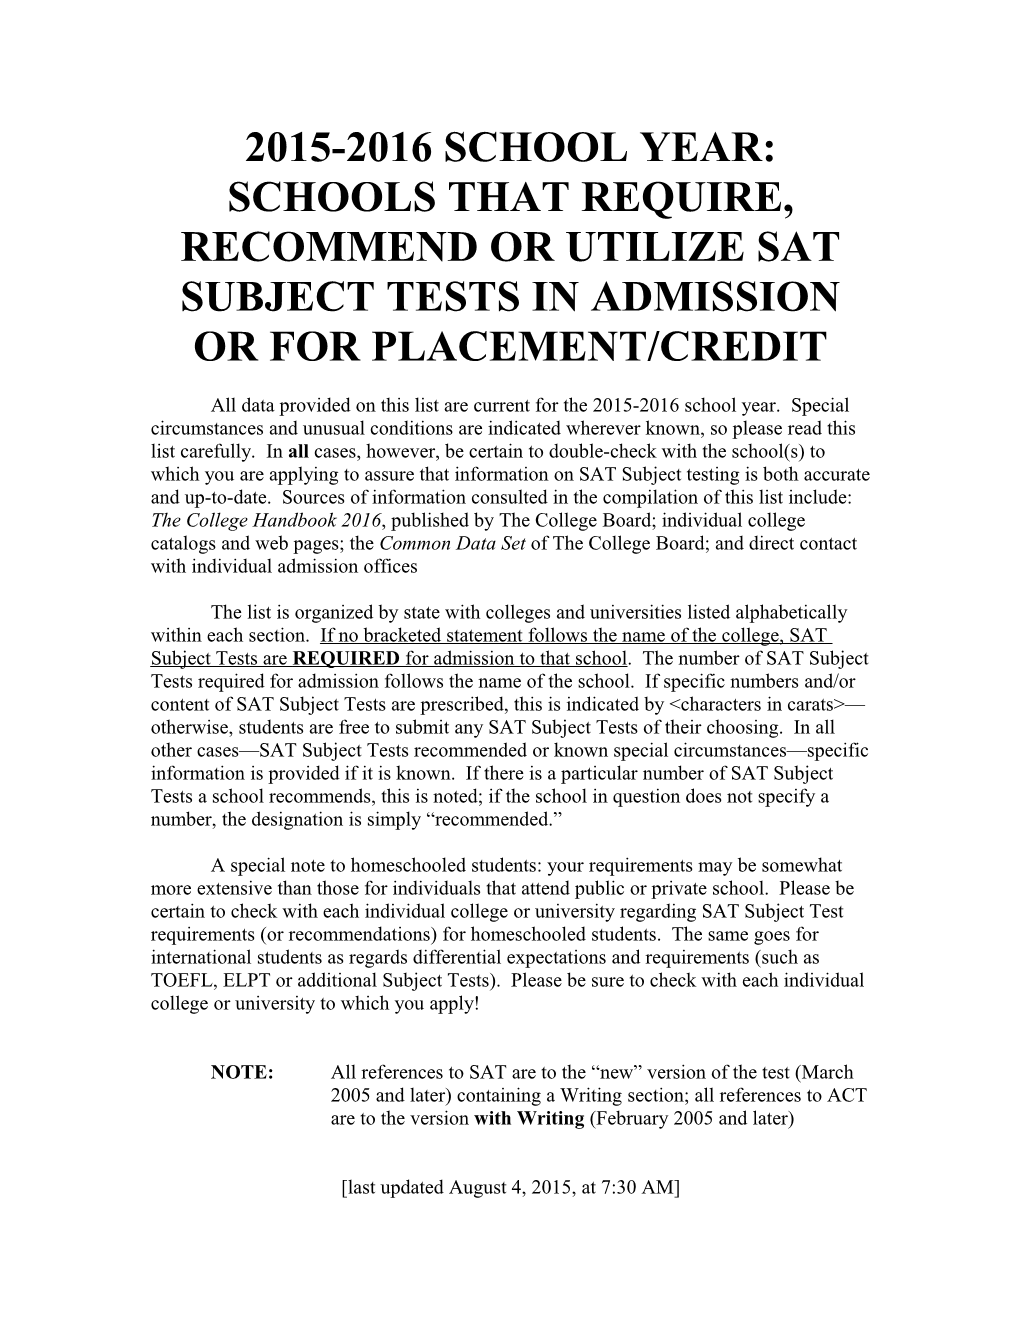 Schools Which Require Or Recommend Sat Ii Tests